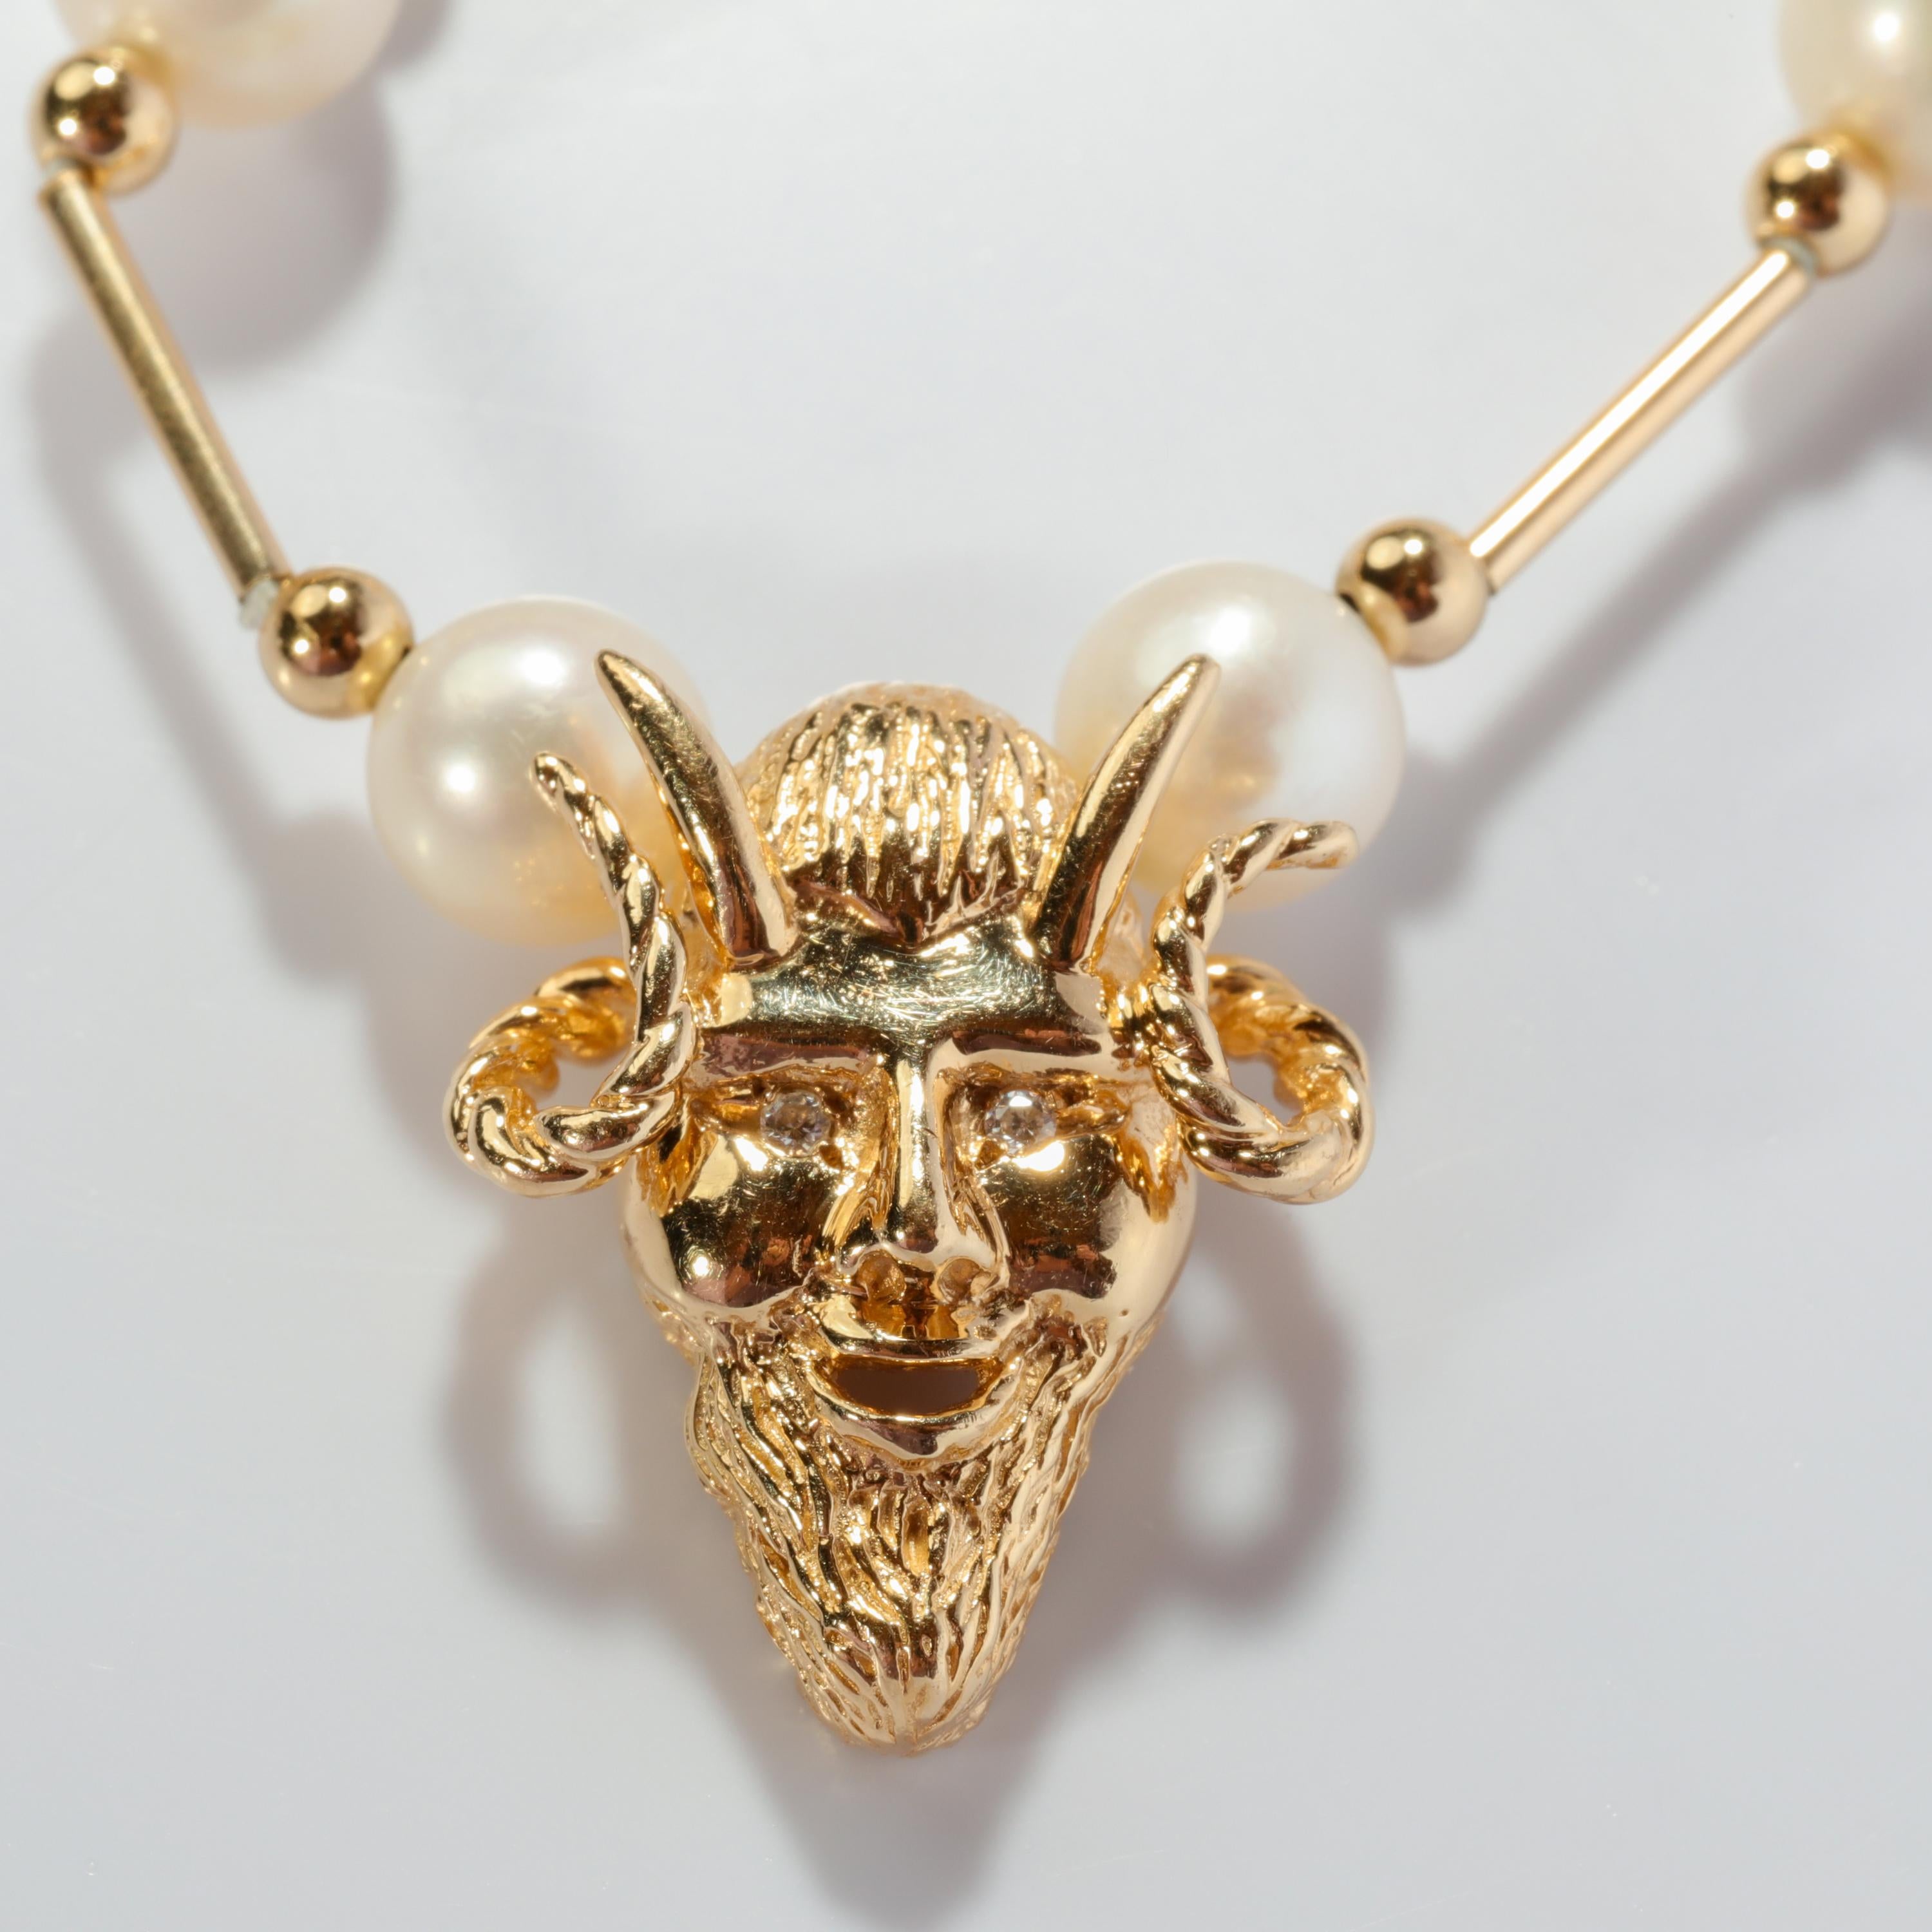 I'll see your Harry Winston 34-carat Golconda diamond necklace with Burmese Ruby and angel skin coral clasp and raise you one gold pearl station necklace with a horned devil head focal point amulet. Sorry, but when it comes to the deeply unusual,